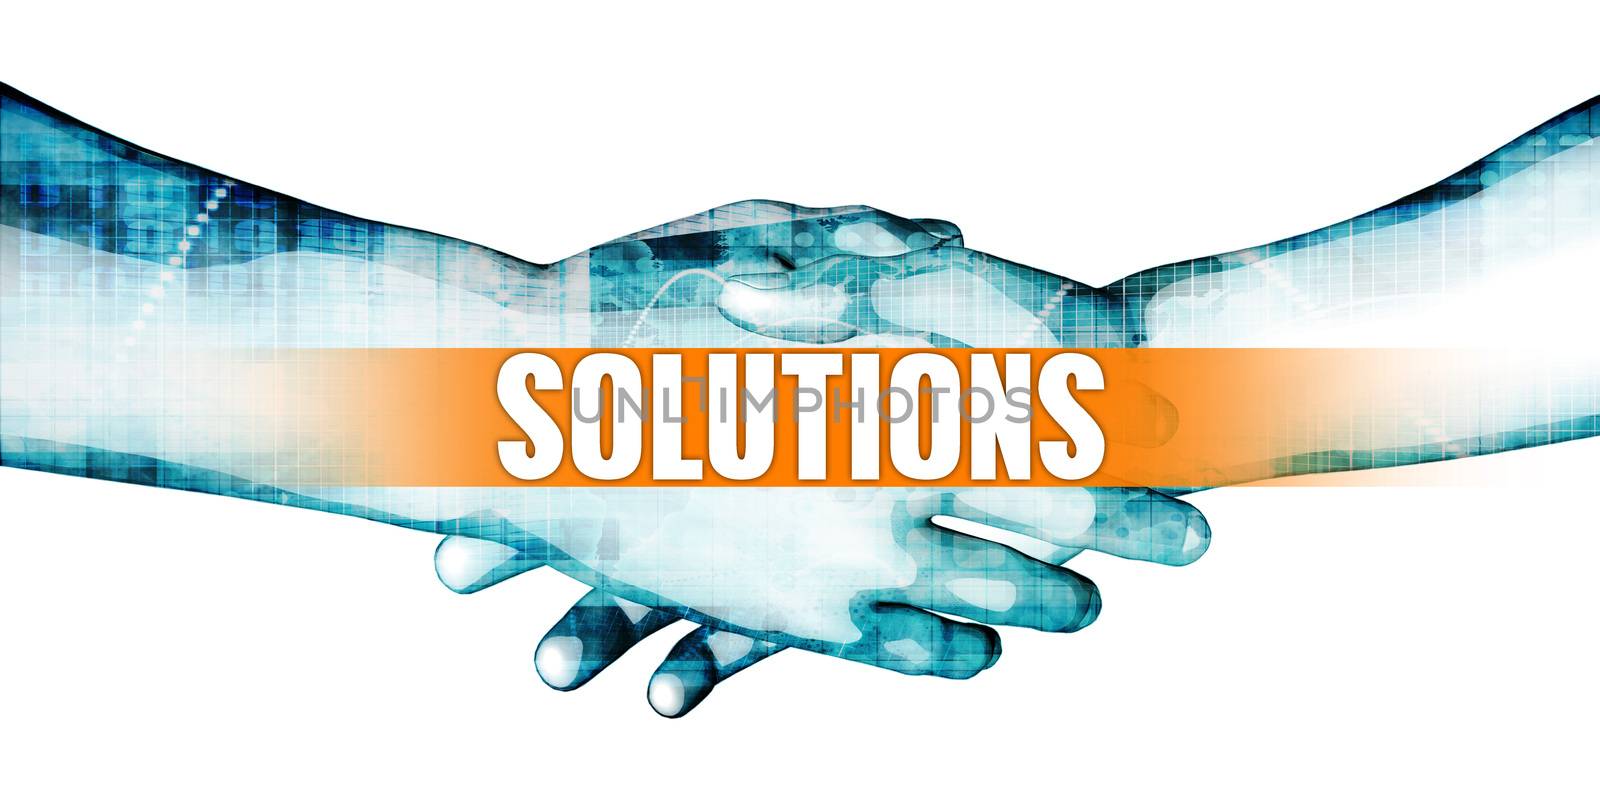 Solutions Concept with Businessmen Handshake on White Background